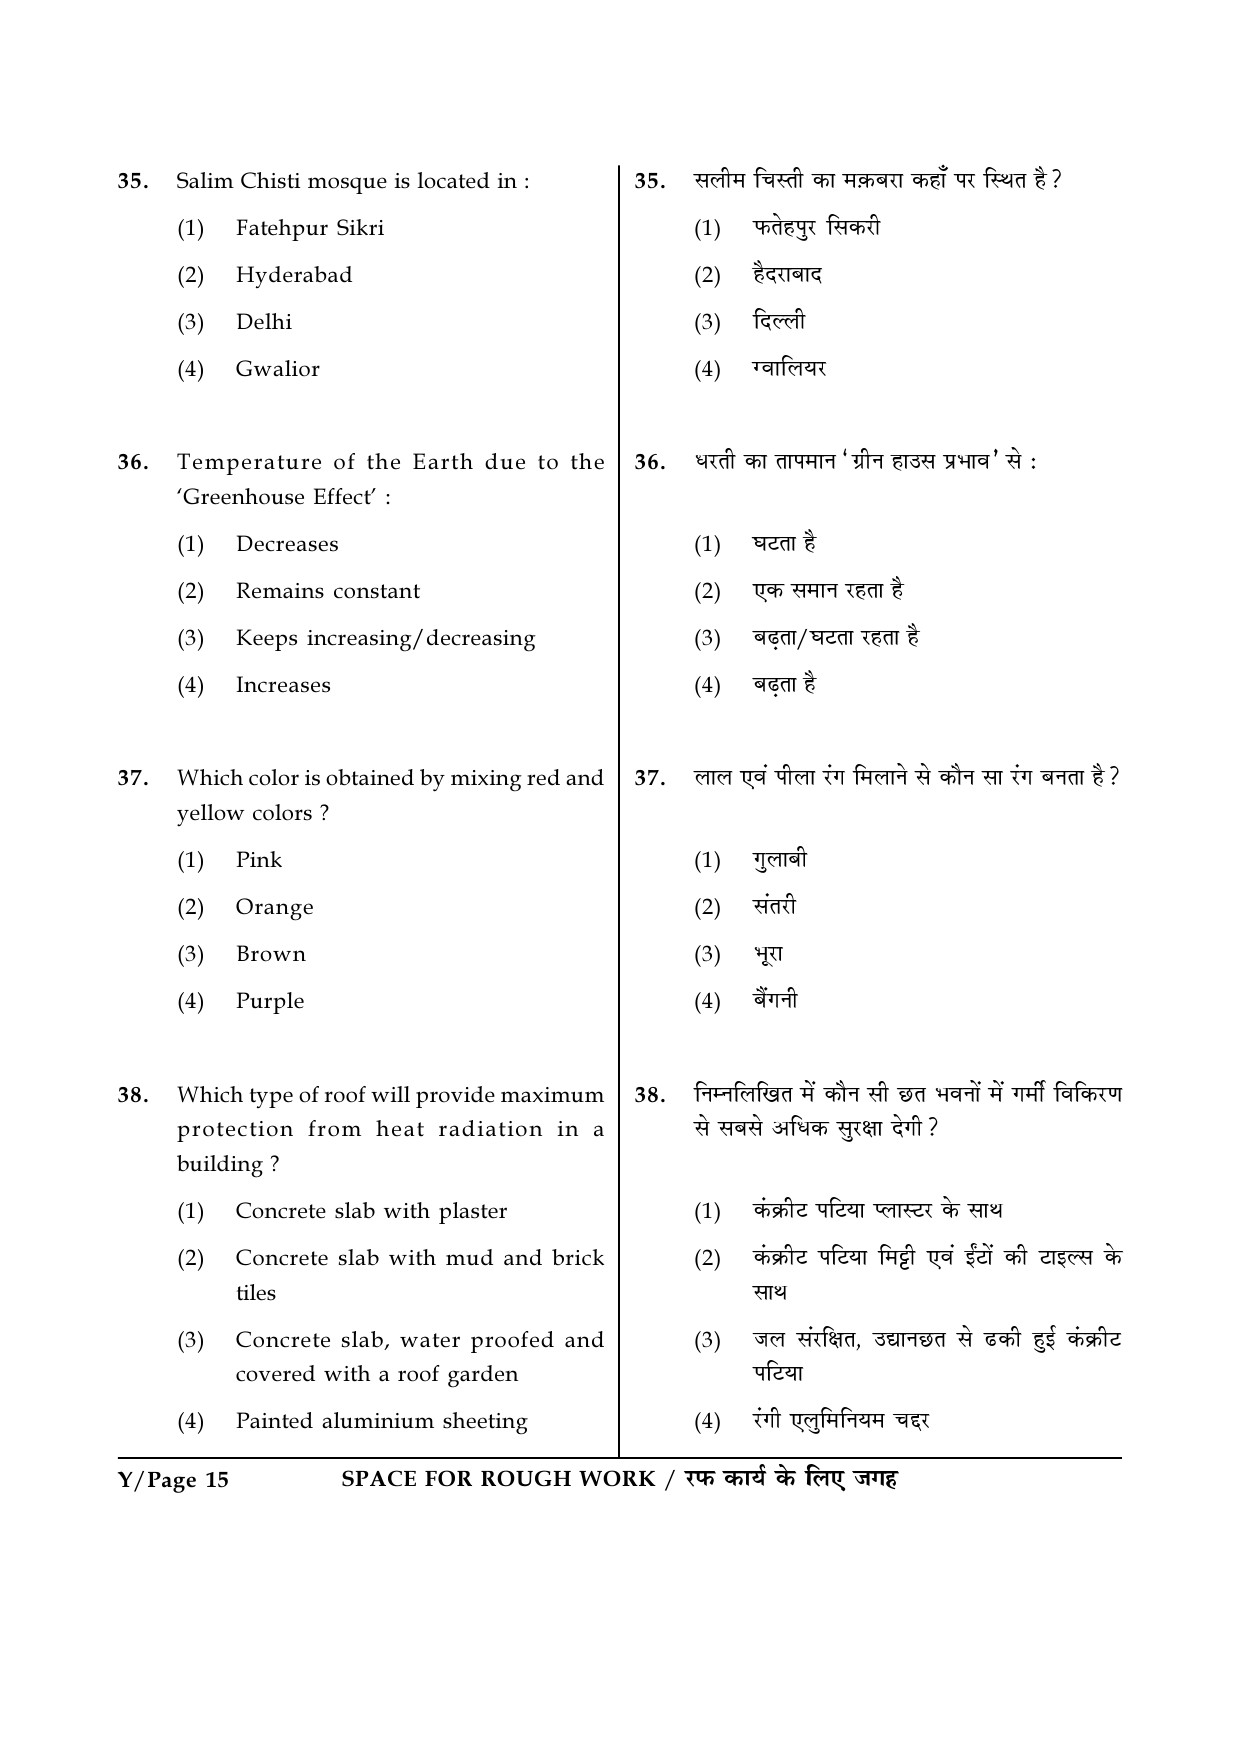 JEE Main Exam Question Paper 2017 Booklet Y 15